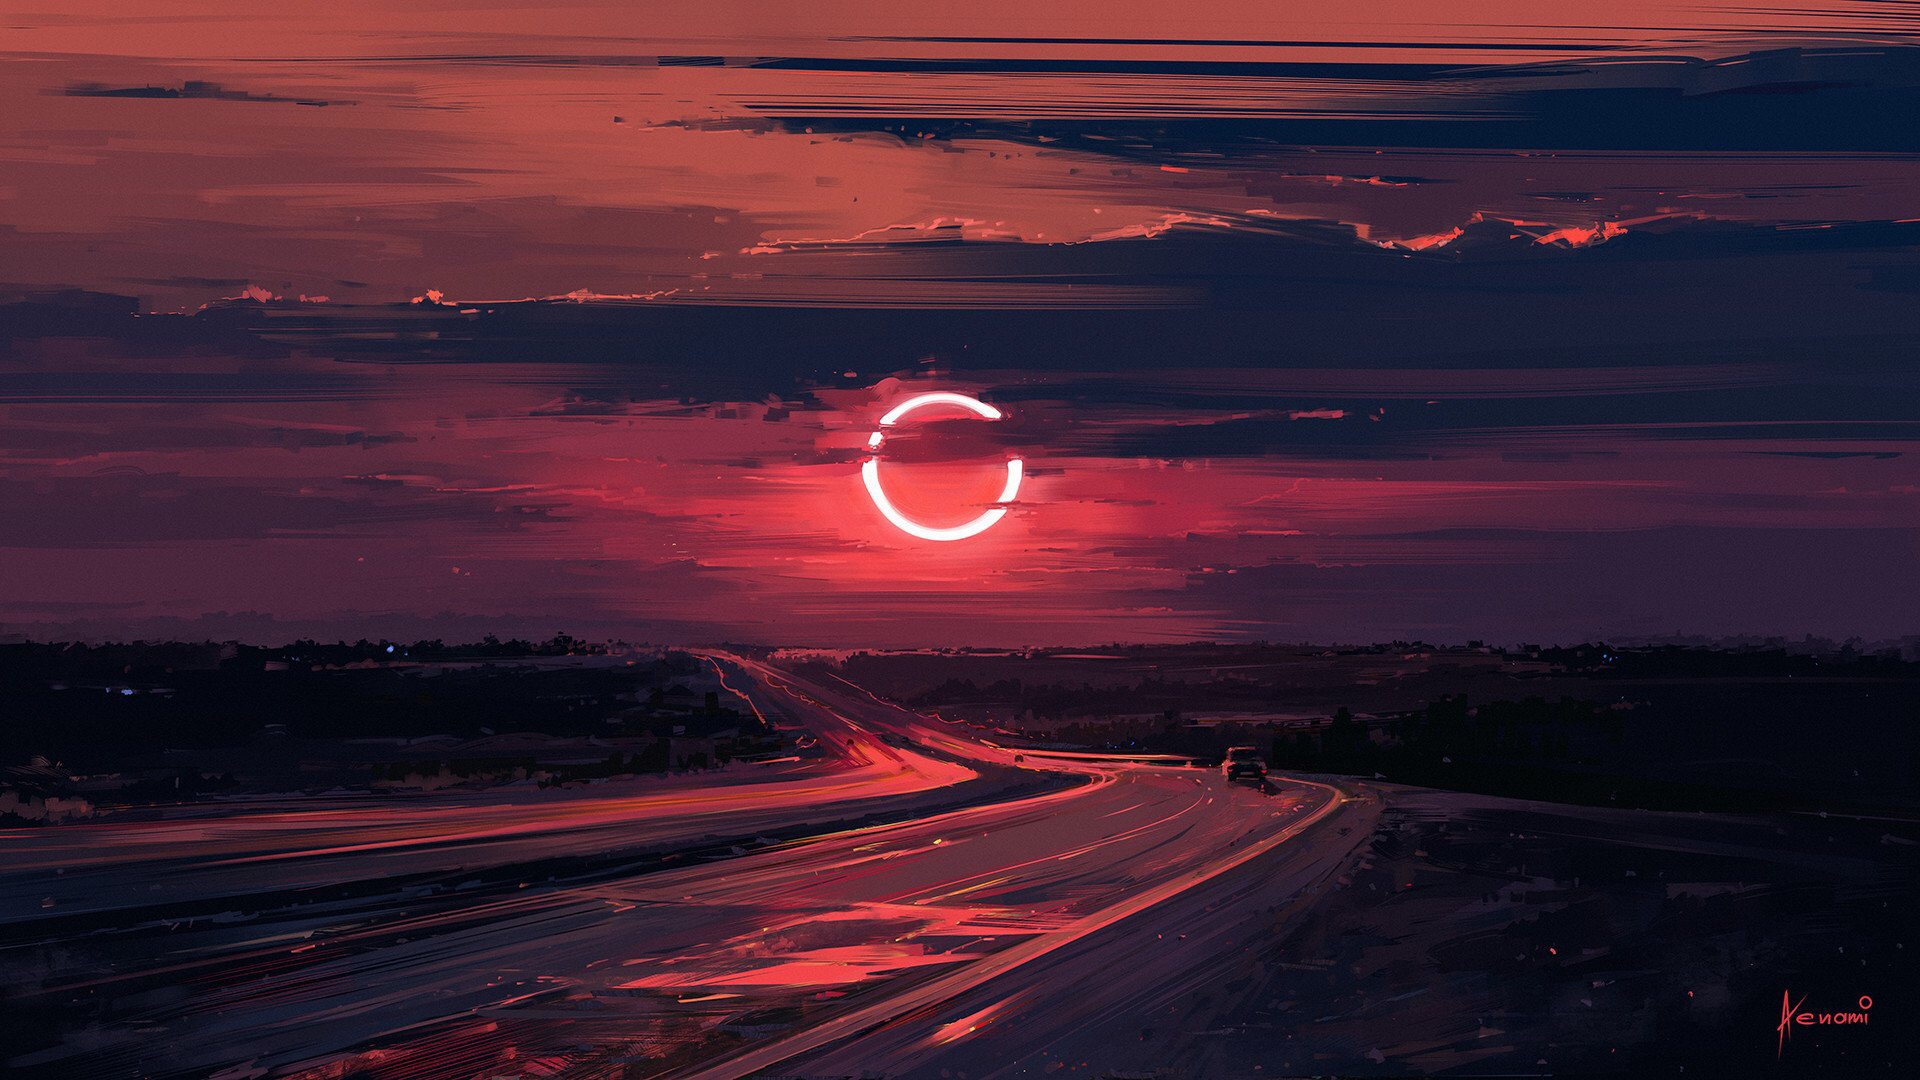 REQUEST is it possible to have this Black Hole Sun image extended to 3840x1080?